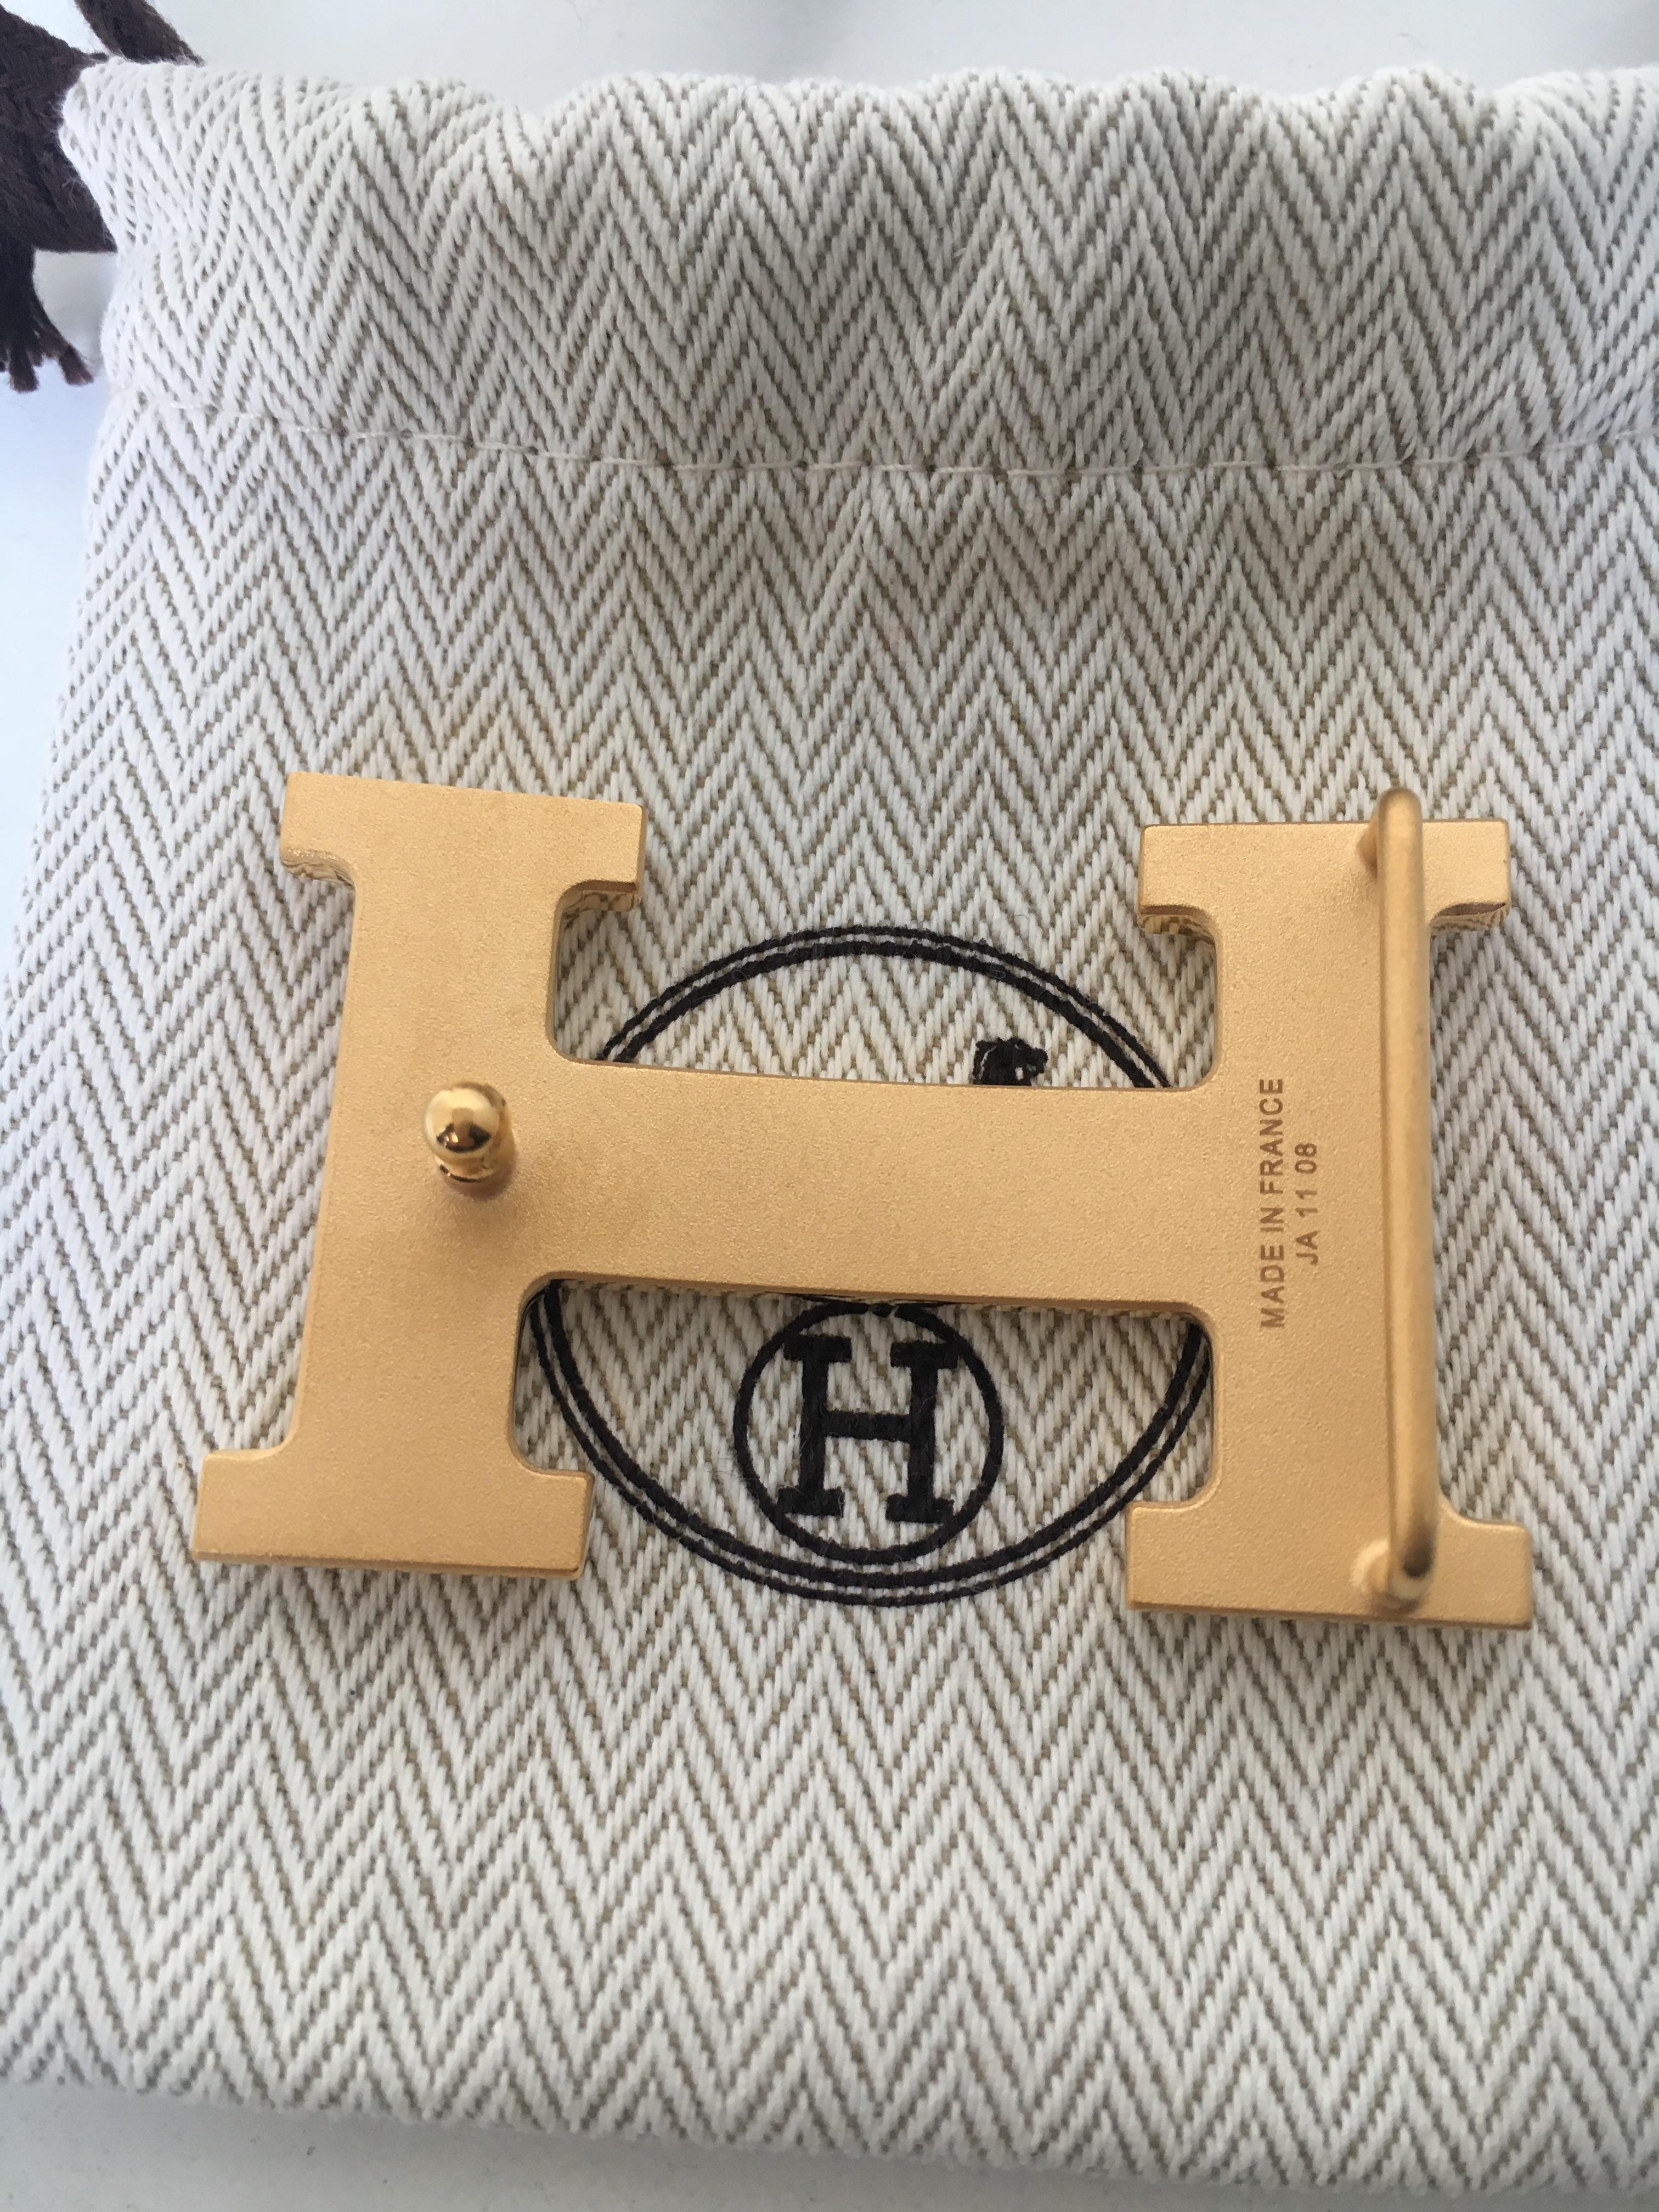 Hermes QUIZZ brushed GOLD color belt buckle 32mm.

This buckle will fit all 32mm wide belt leather by Hermes. 
The buckle is in mint condition.